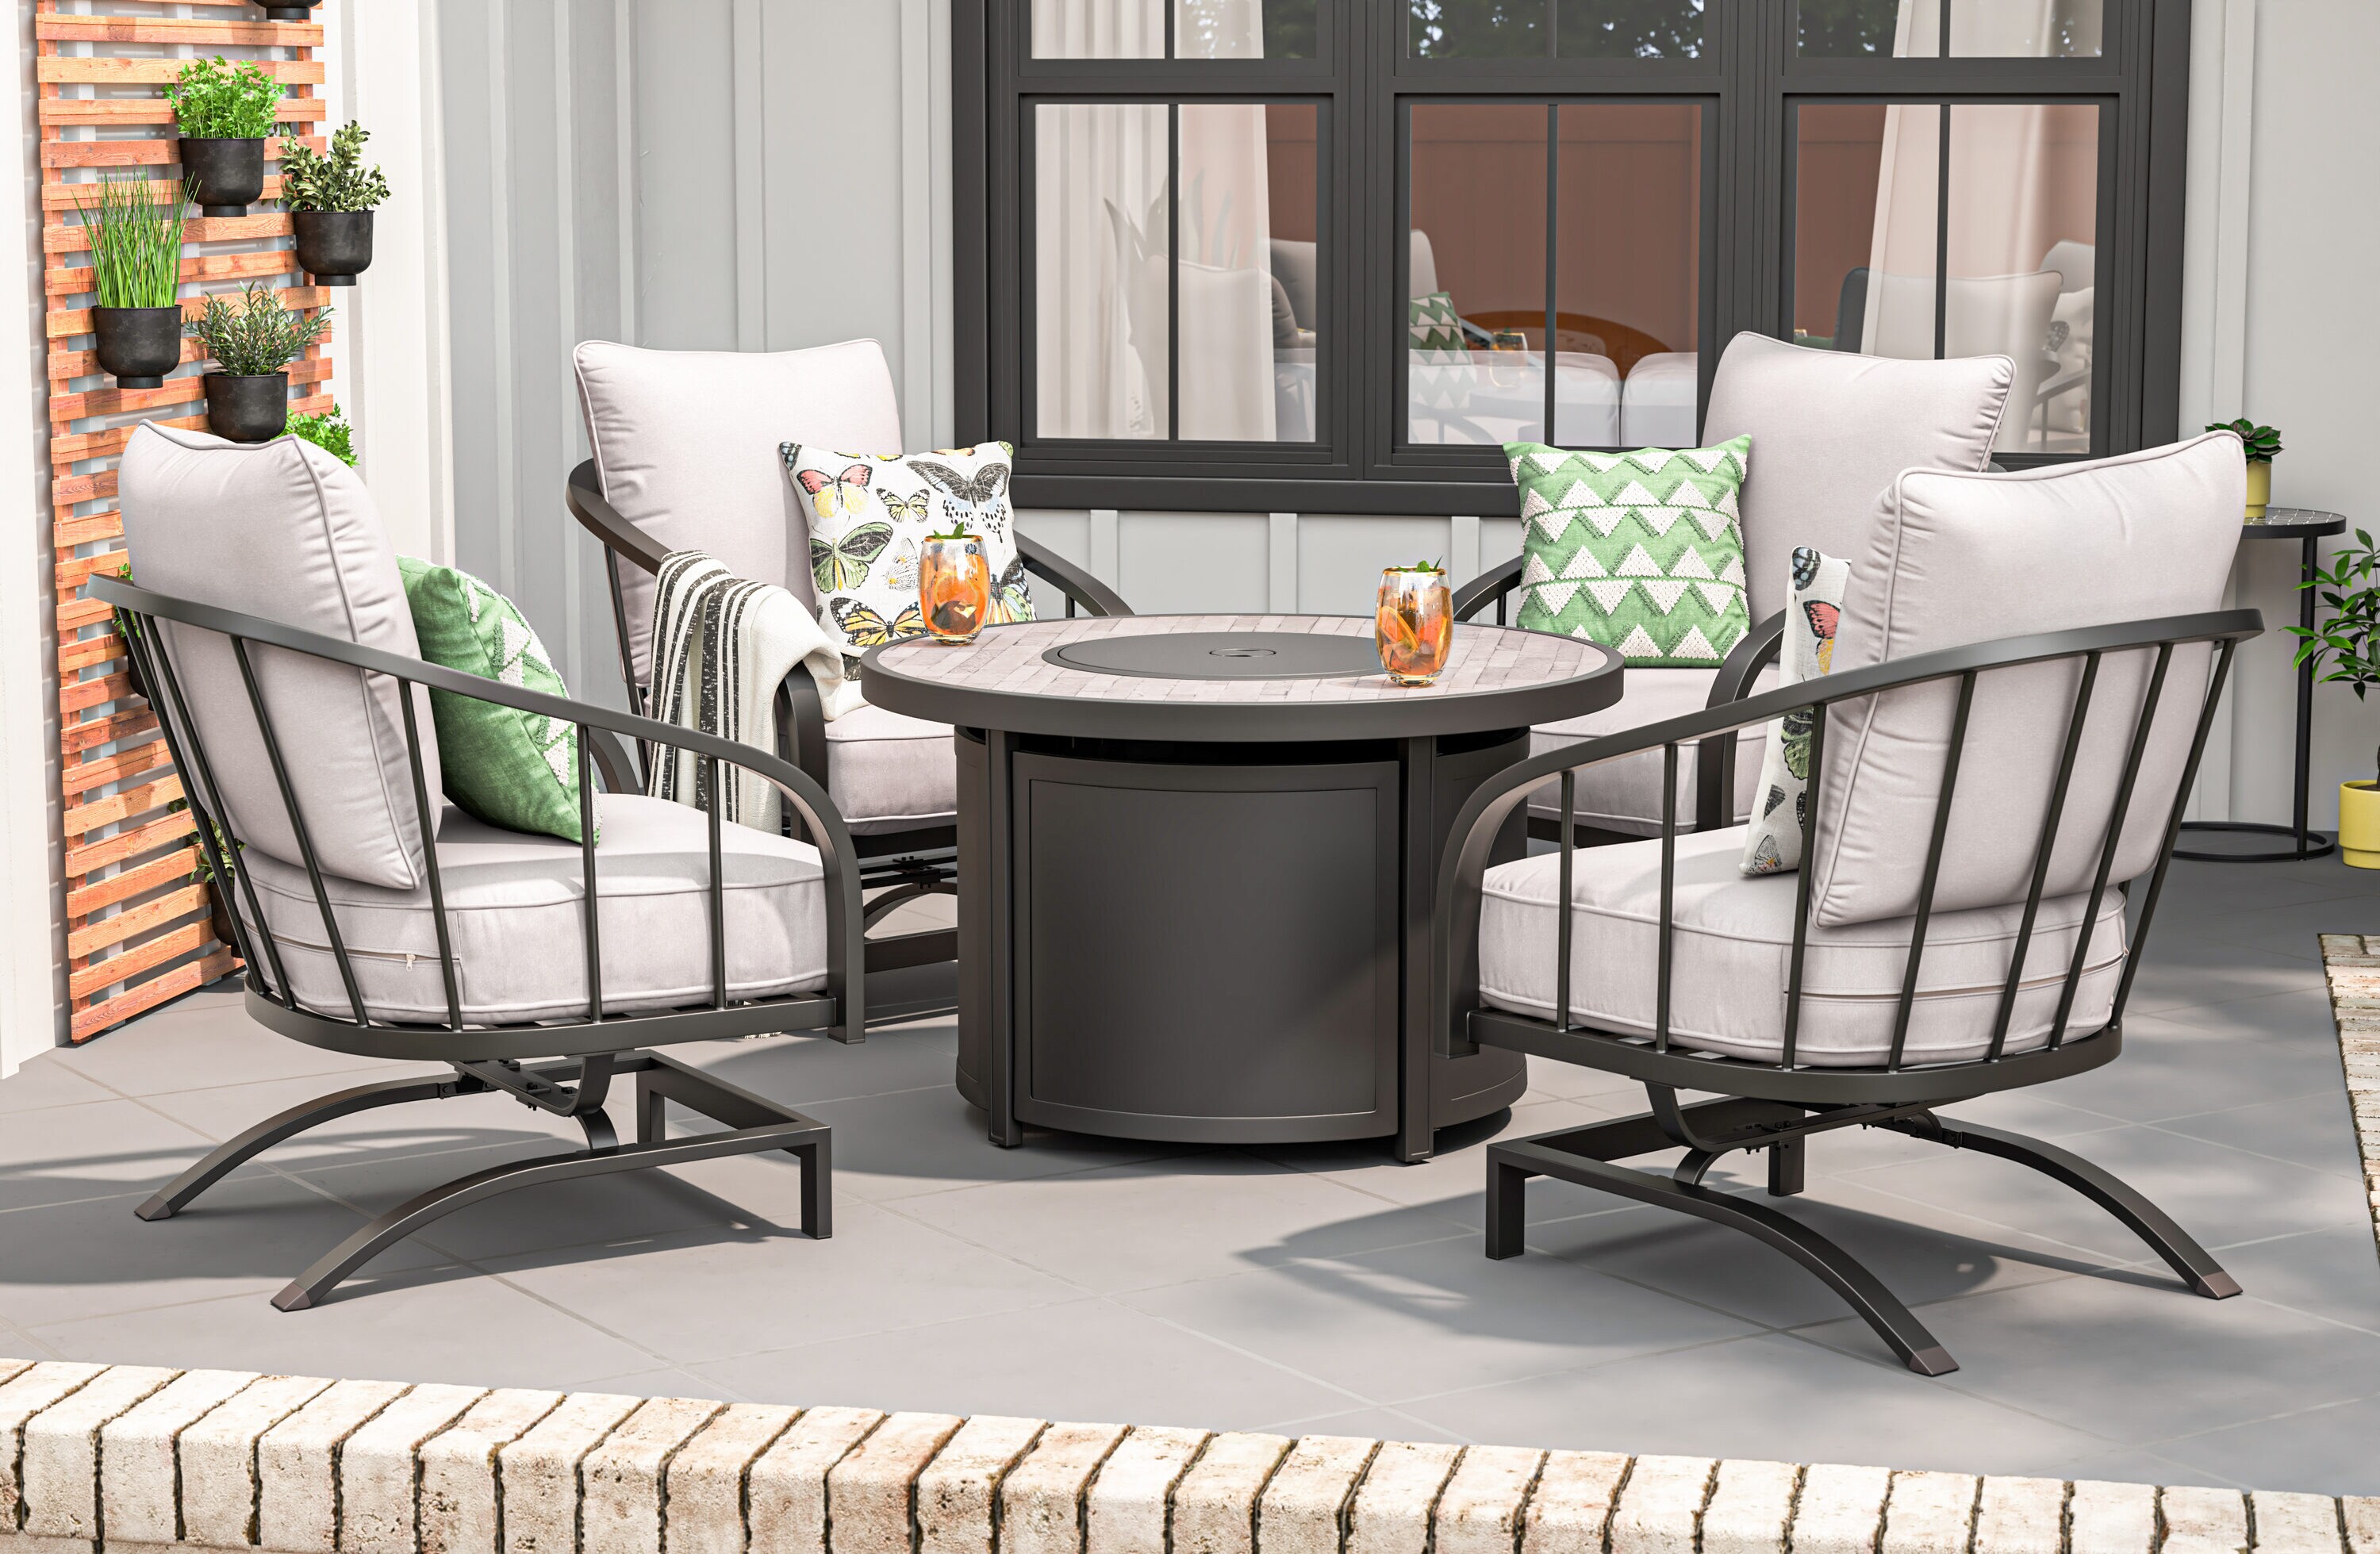 black patio furniture sets at lowes